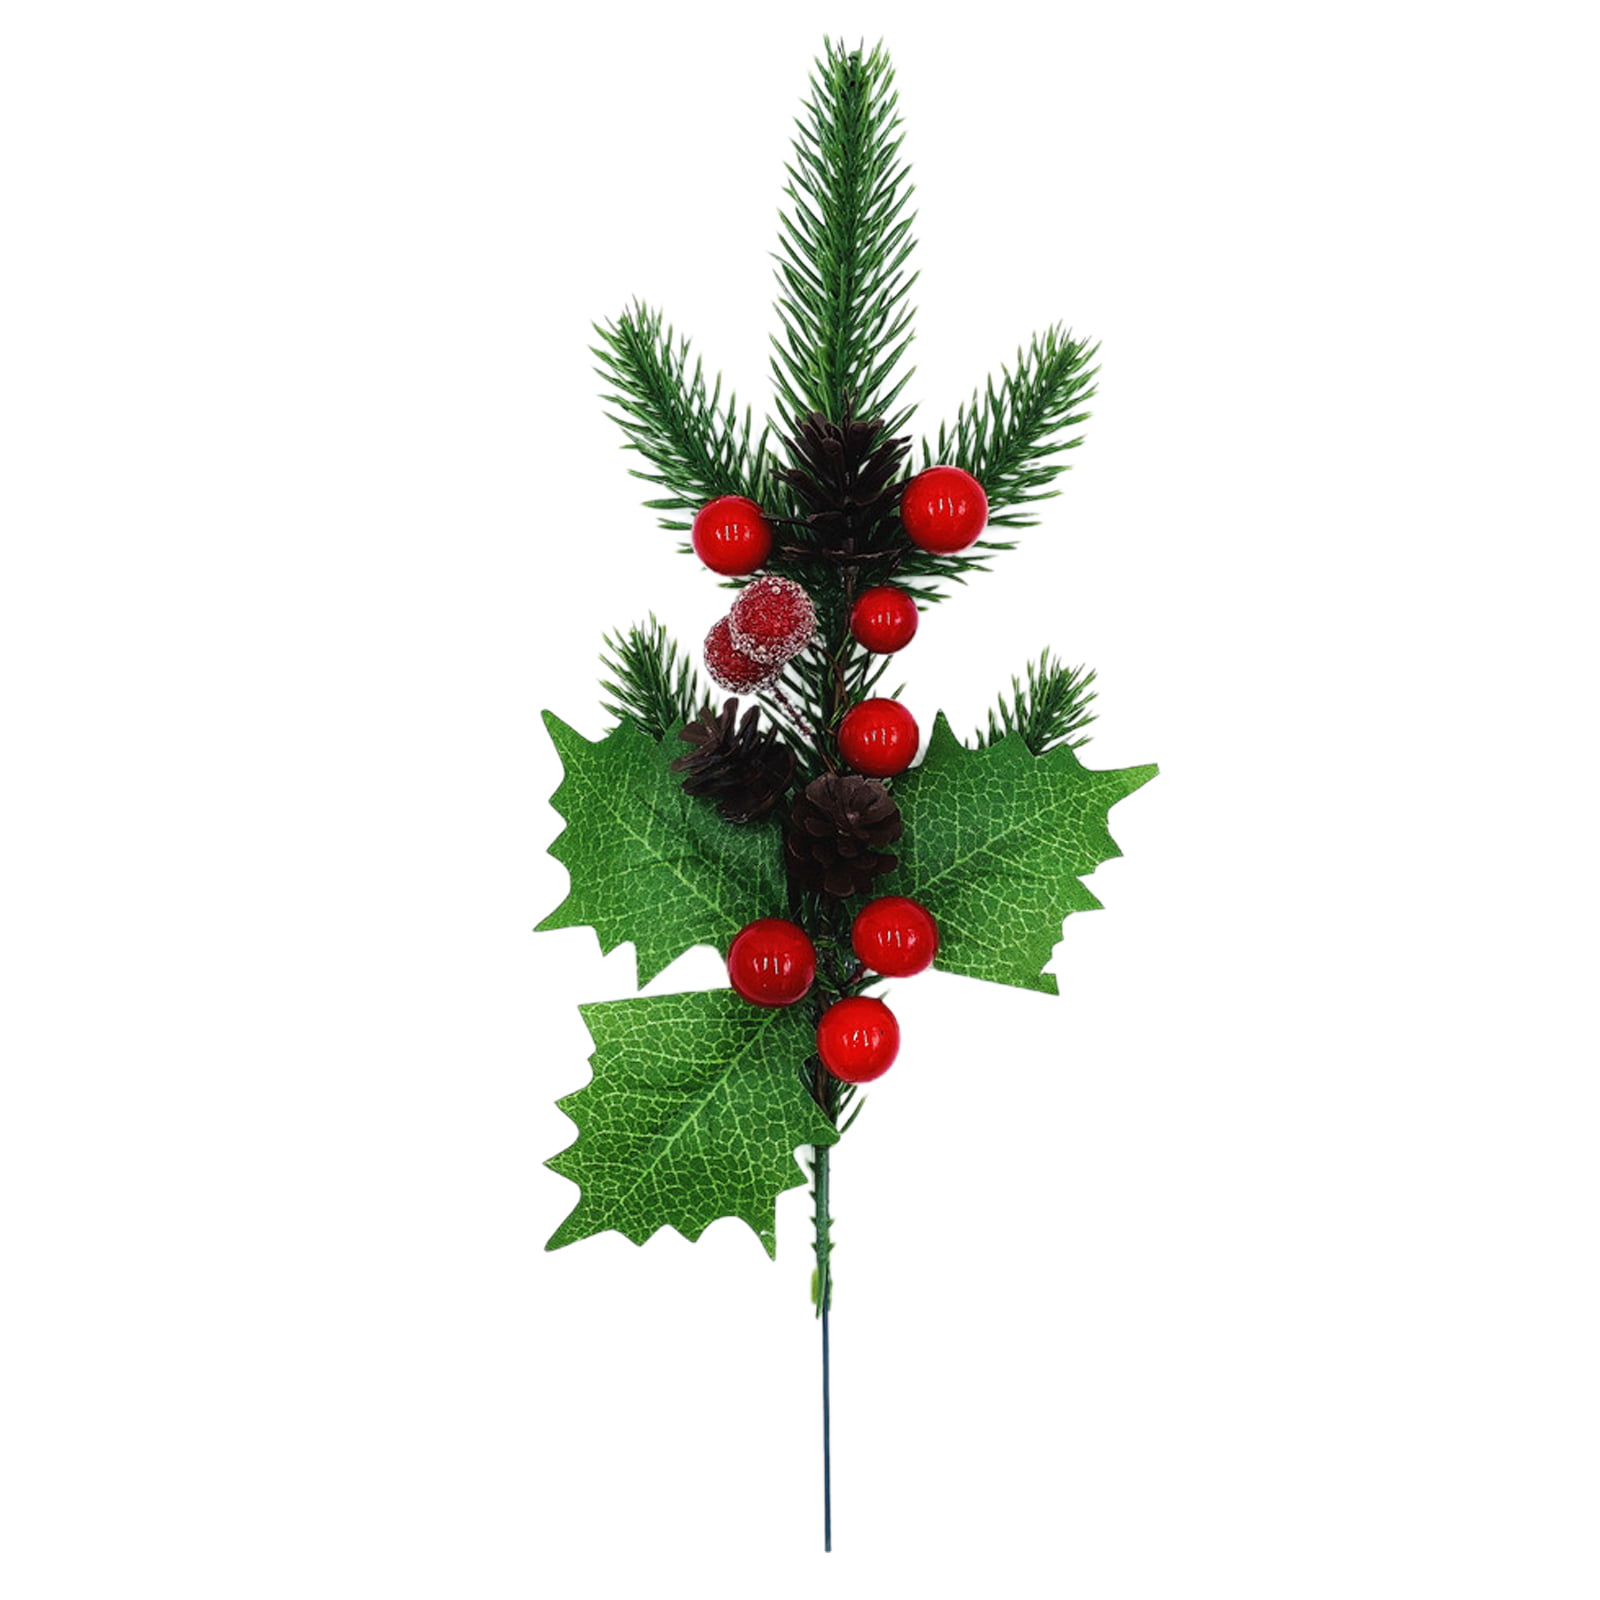 30cm Artifical Christmas Wreath Snow Berries and Holly Ivy Fern Foliage Cones 